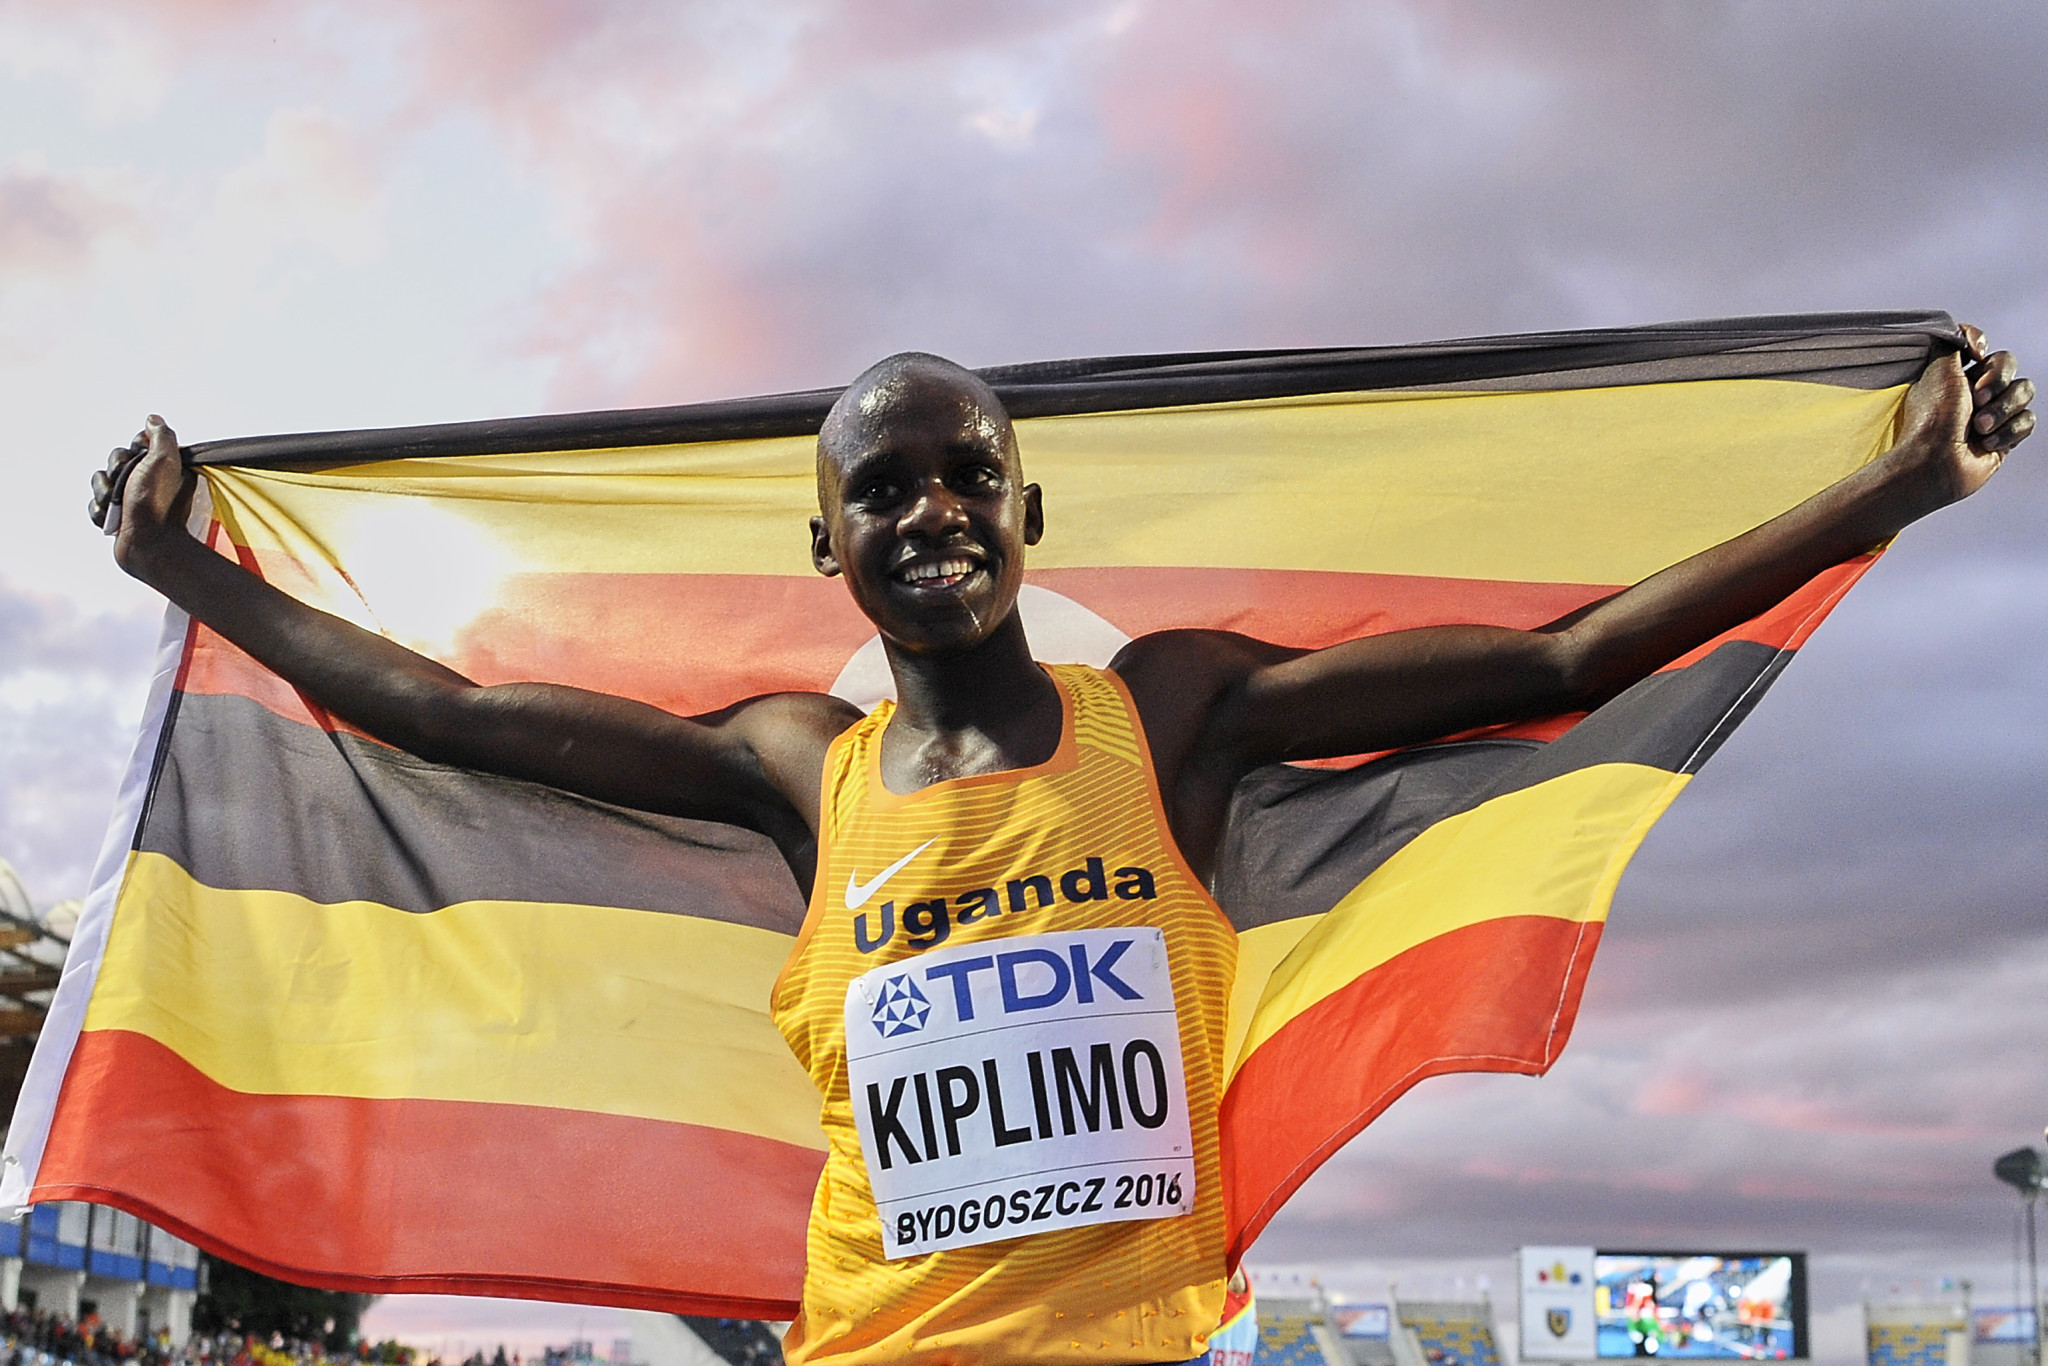 Kiplimo wins again at IAAF Cross Country Permit in Seville